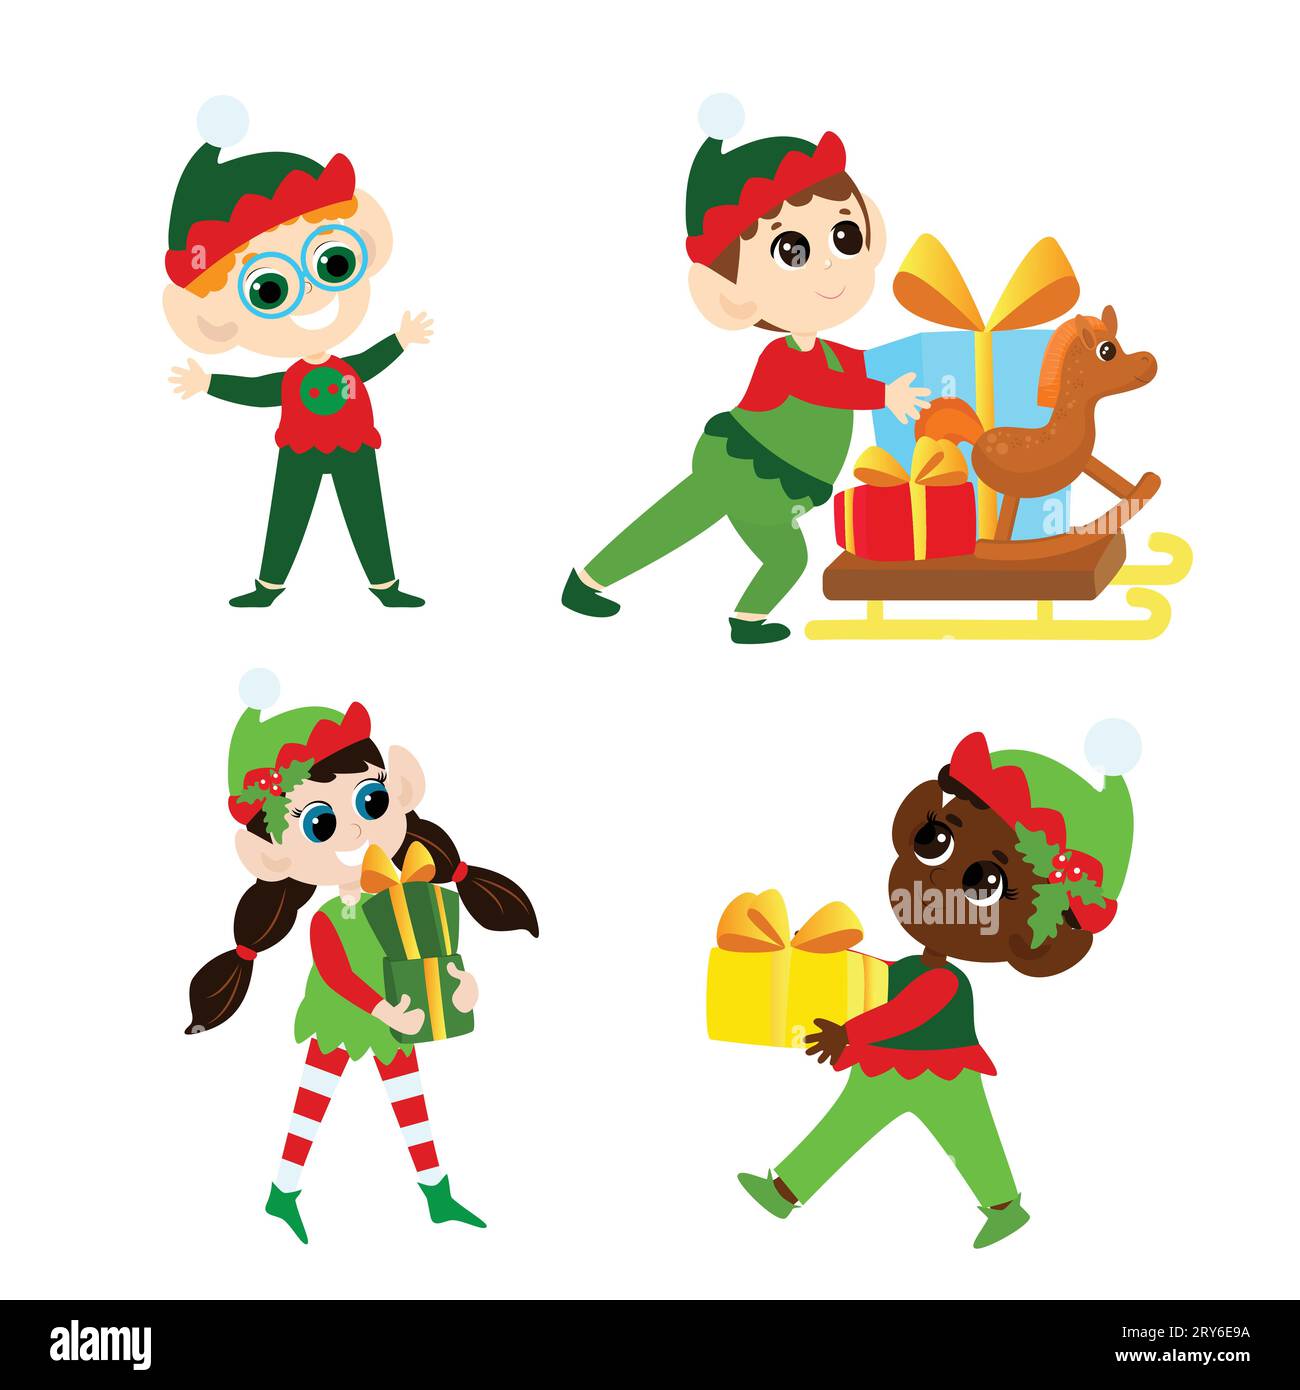 Set Christmas elves. Multicultural boys and girls in traditional elf costumes. Elves are depicted with sledges and gifts. Stock Vector